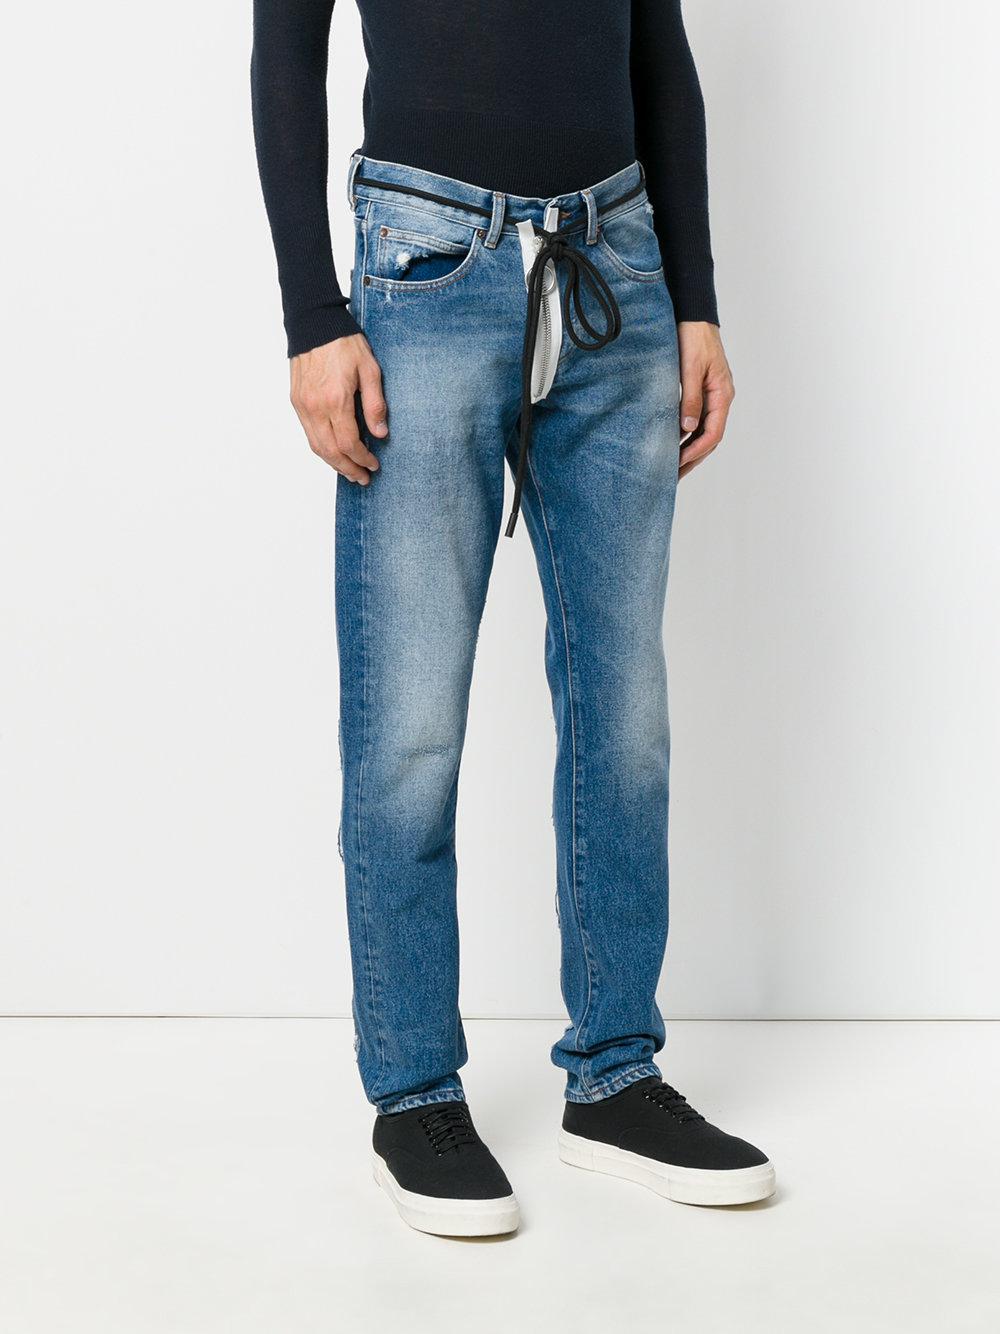 Off-White c/o Virgil Abloh String Tie Faded Jeans in Blue for Men | Lyst